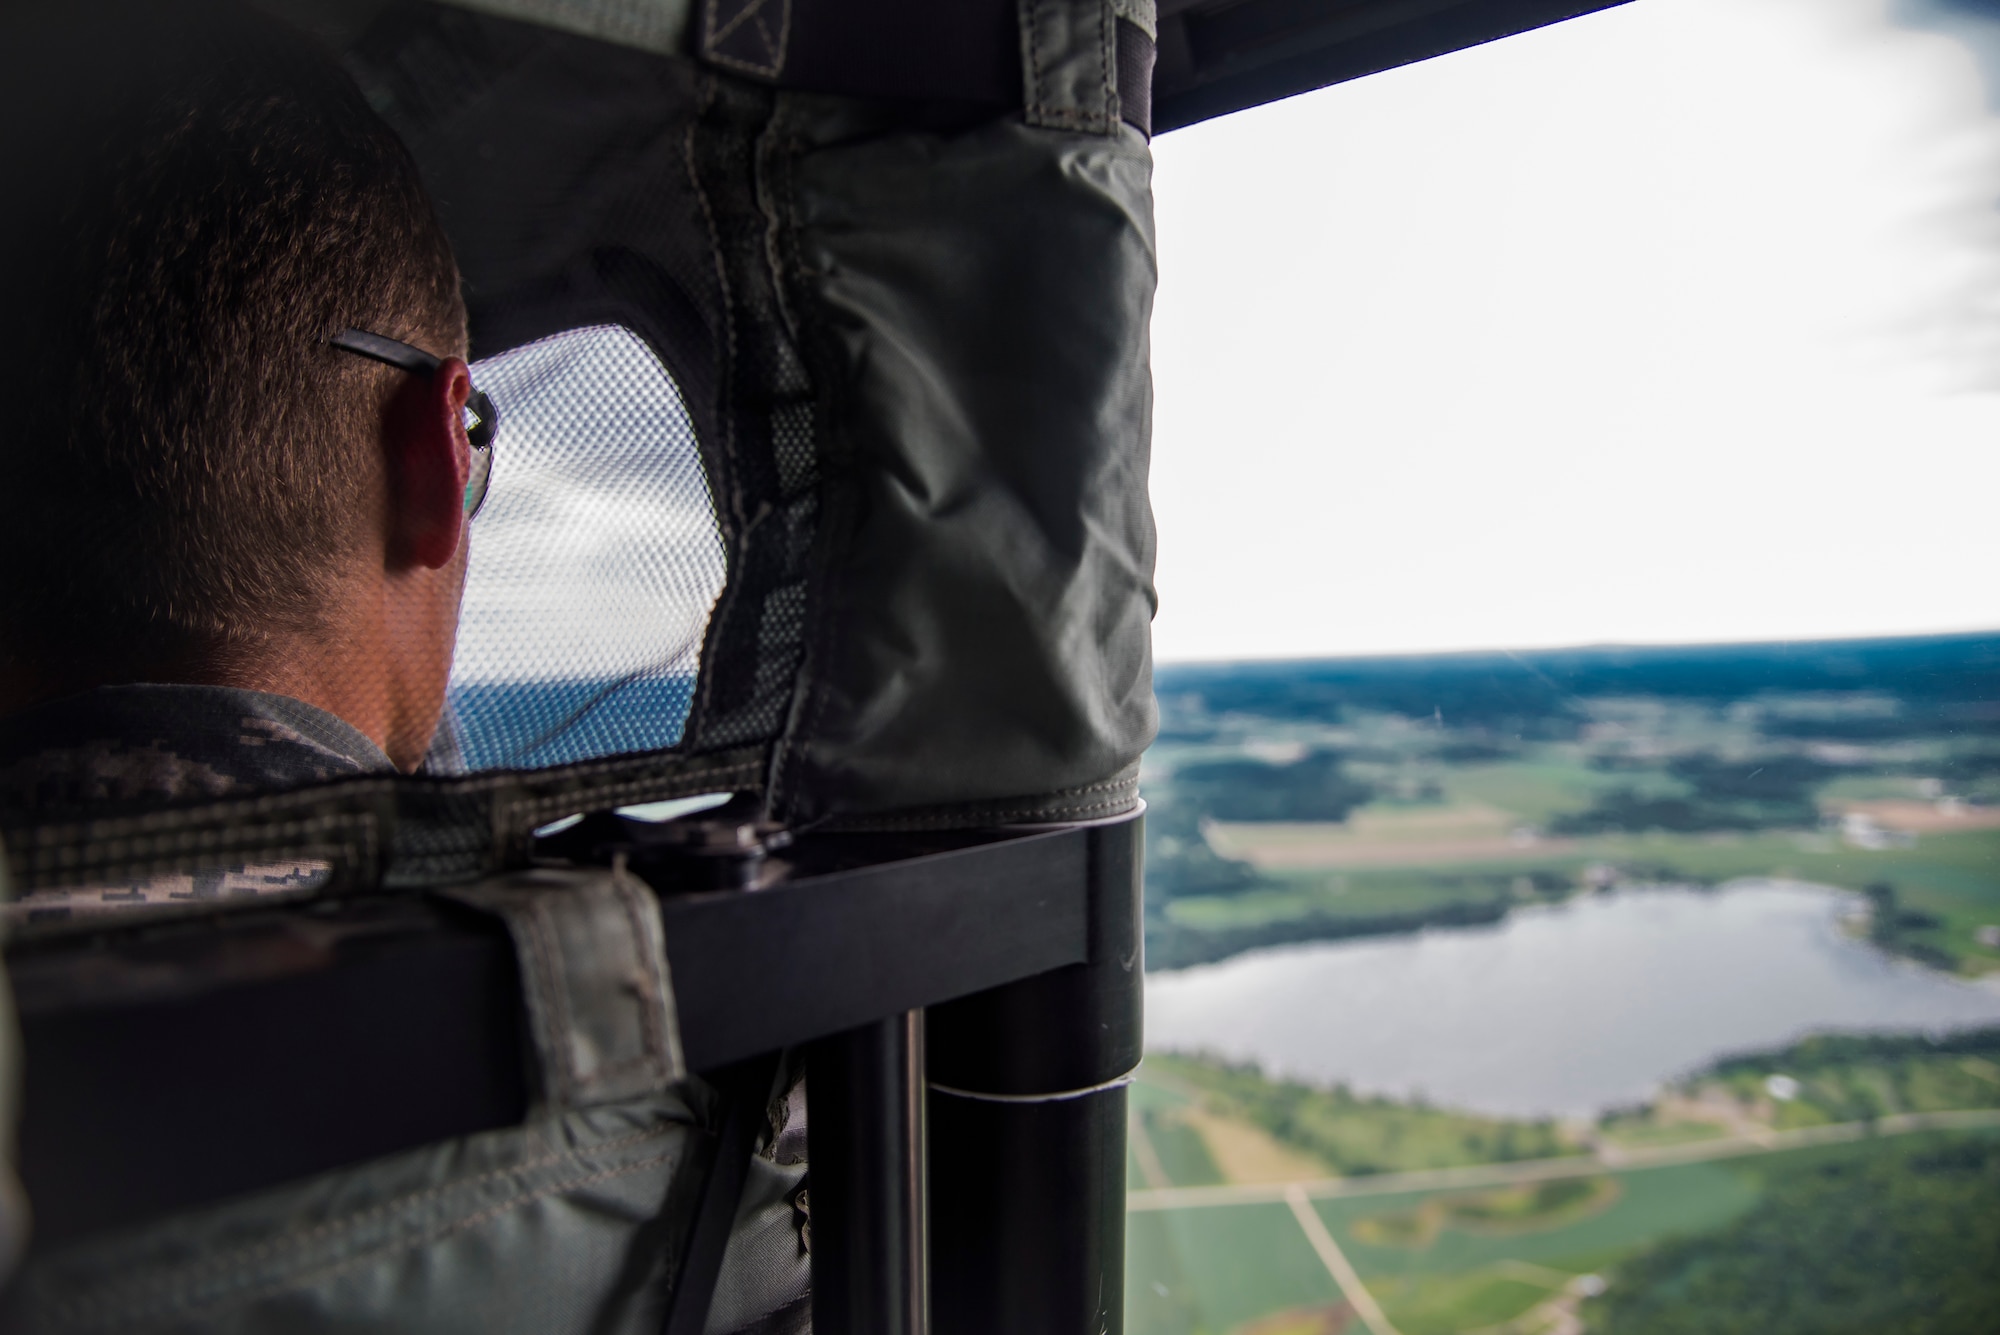 Airman 1st Class Silas Westrick, a security forces member with the 115th Fighter Wing, Truax Field, Wisconsin, looks out the window of a UH-60 Black Hawk helicopter while in flight from Truax Field to Volk Field July 25, 2018. Westrick was a participant of the 2018 Junior Enlisted Orientation Program which allows junior enlisted Airmen to better understand the mission of all the units in the Wisconsin Air National Guard. 
(U.S. Air National Guard photo by Airman Cameron Lewis)